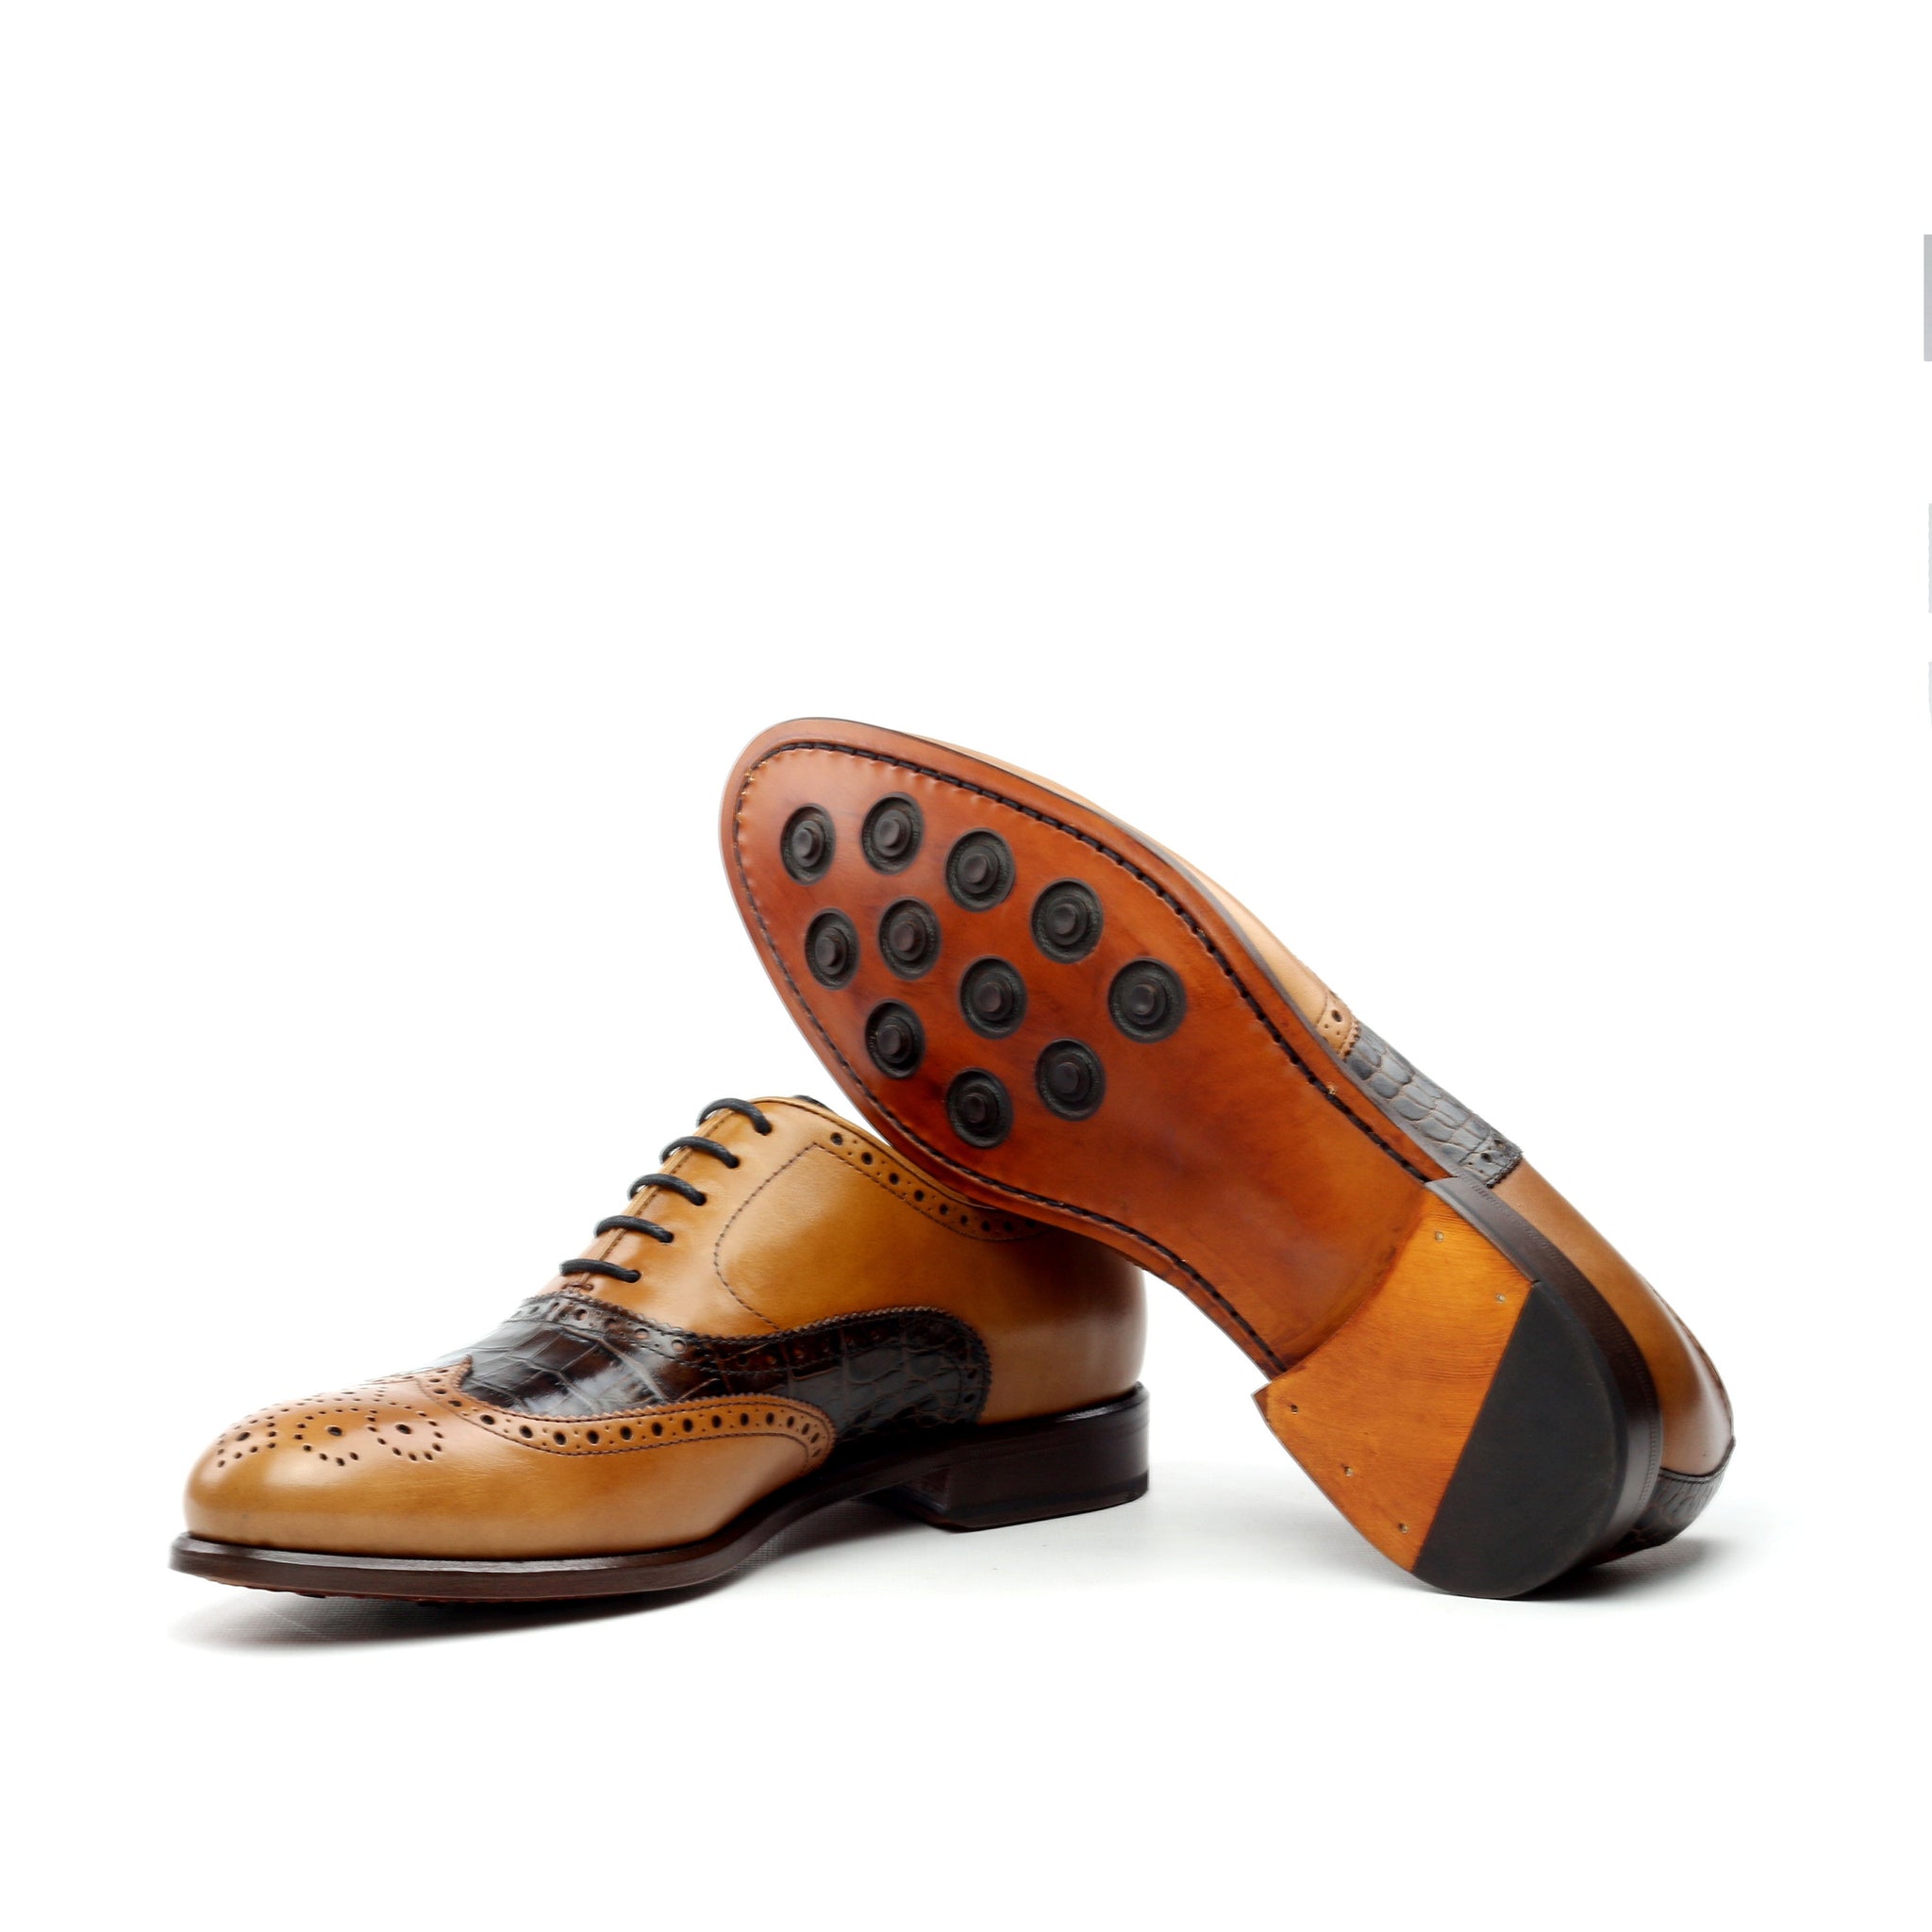 CRASSUS - Unique Handcrafted Golden Brown Oxford Dress W/ Exotic Croc Highlights